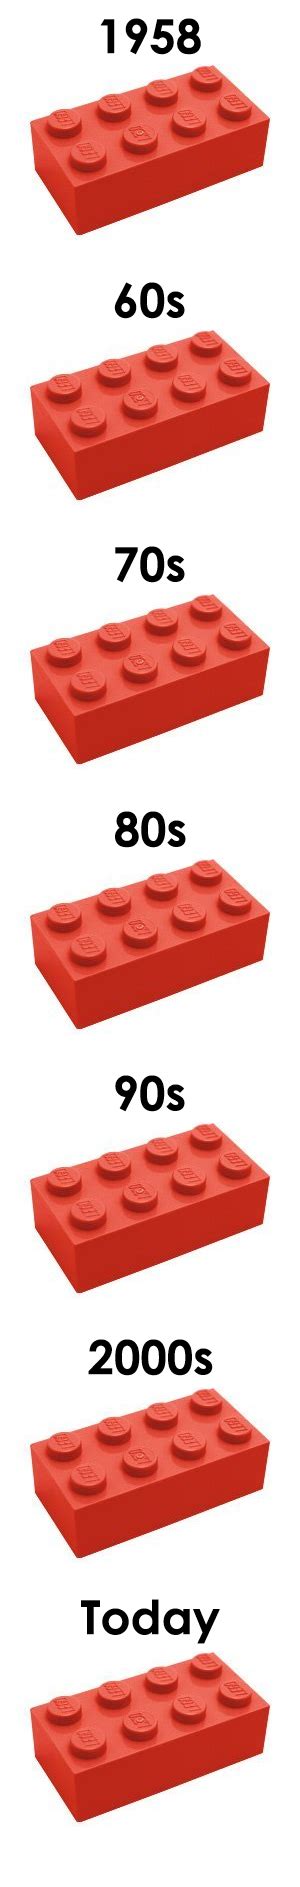 Evolution Of Lego Bricks From 1958 To Today Infographic Notinteresting